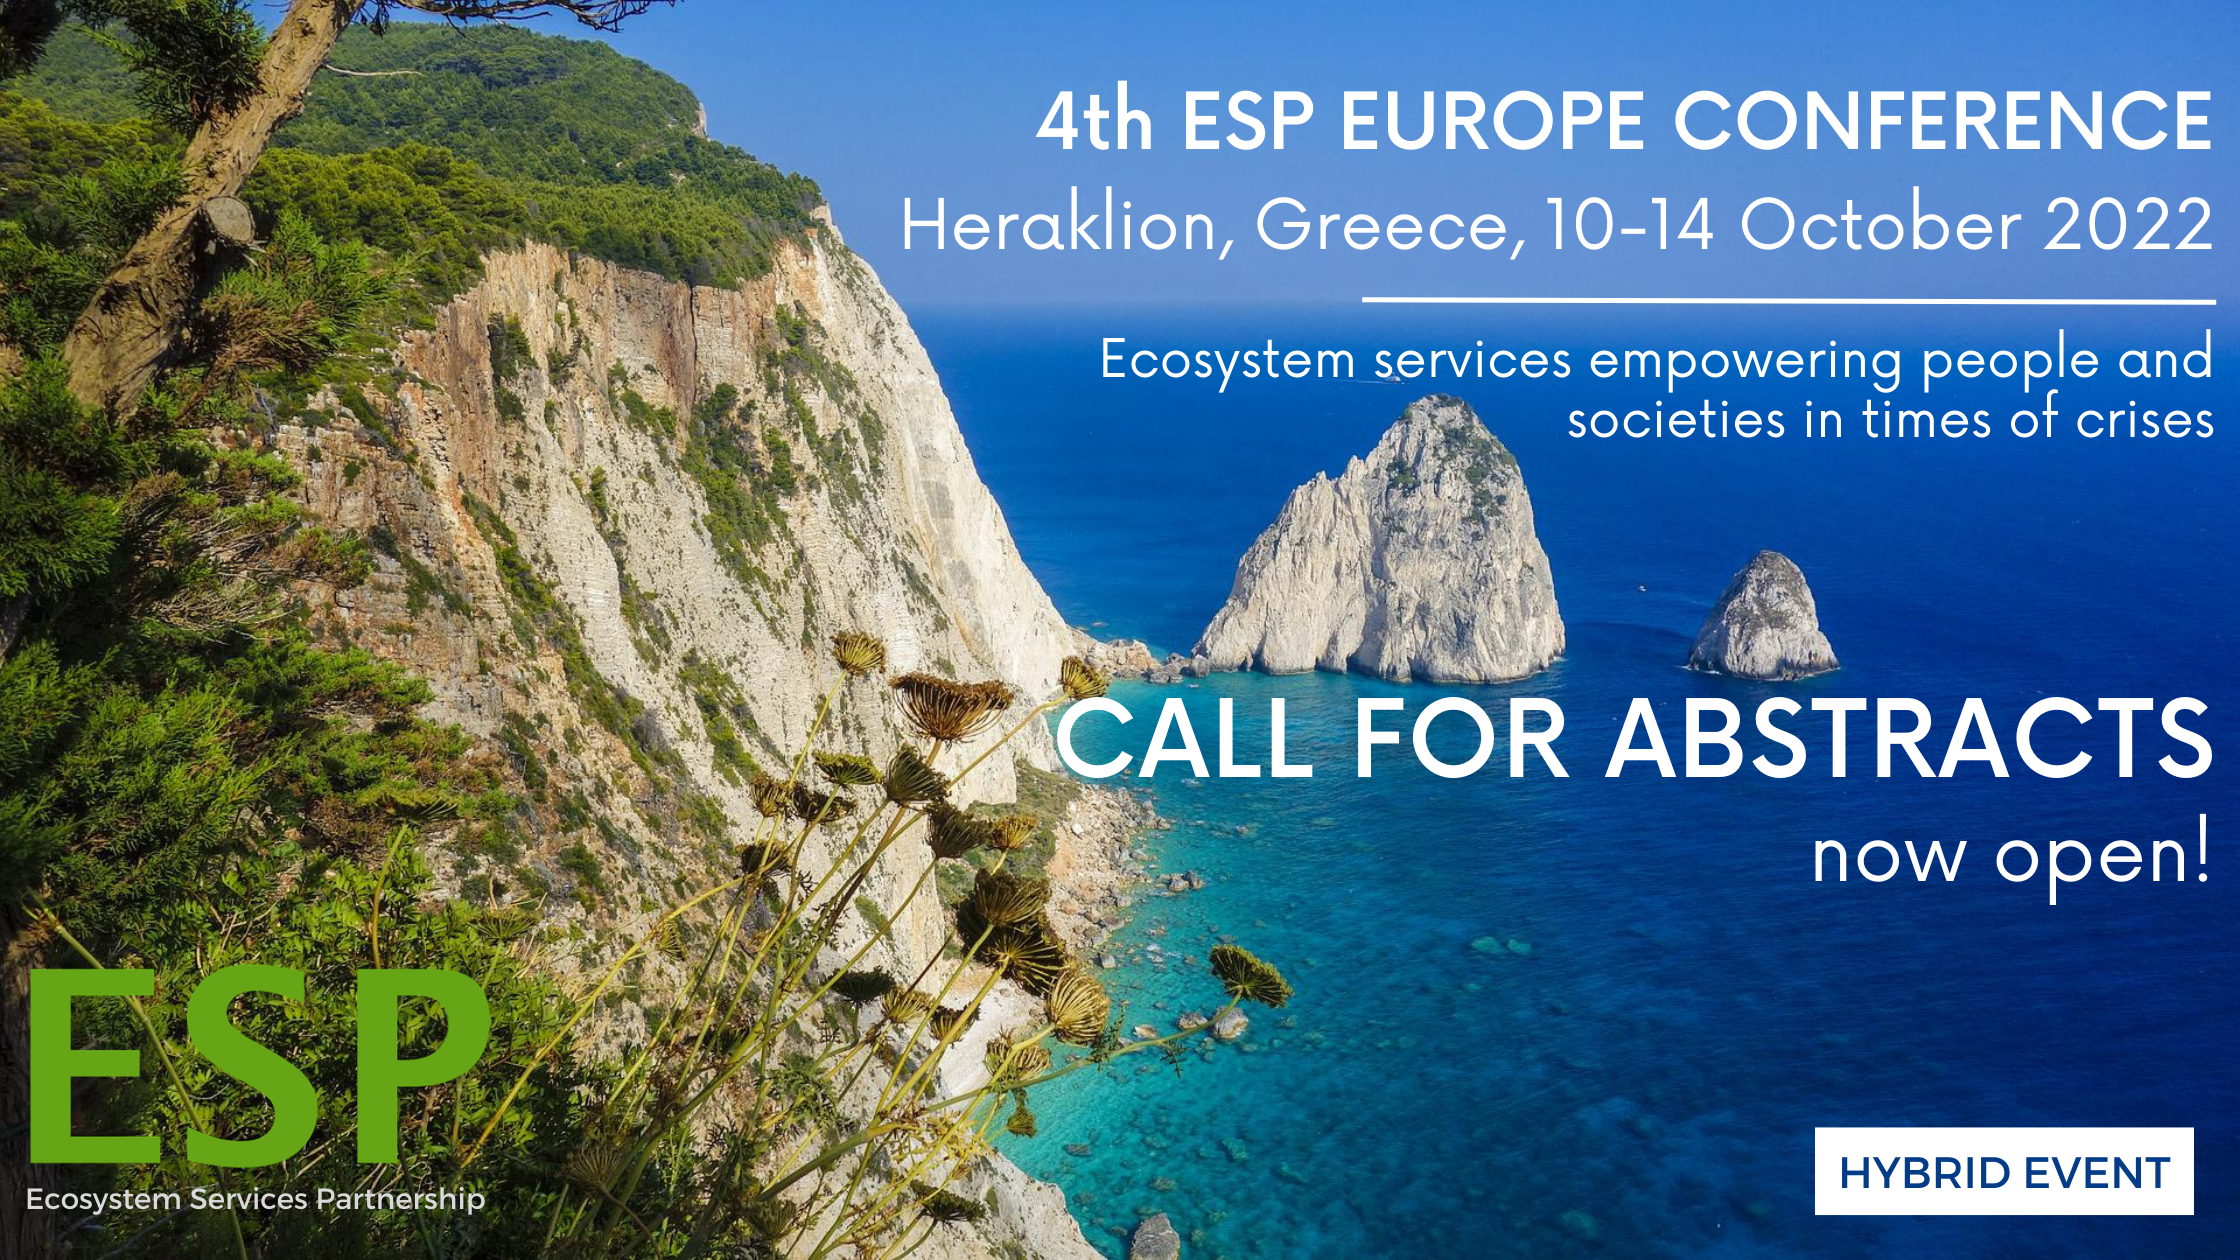 4th ESP Europe Conference: the final deadline to submit the abstract is 14 August 2022